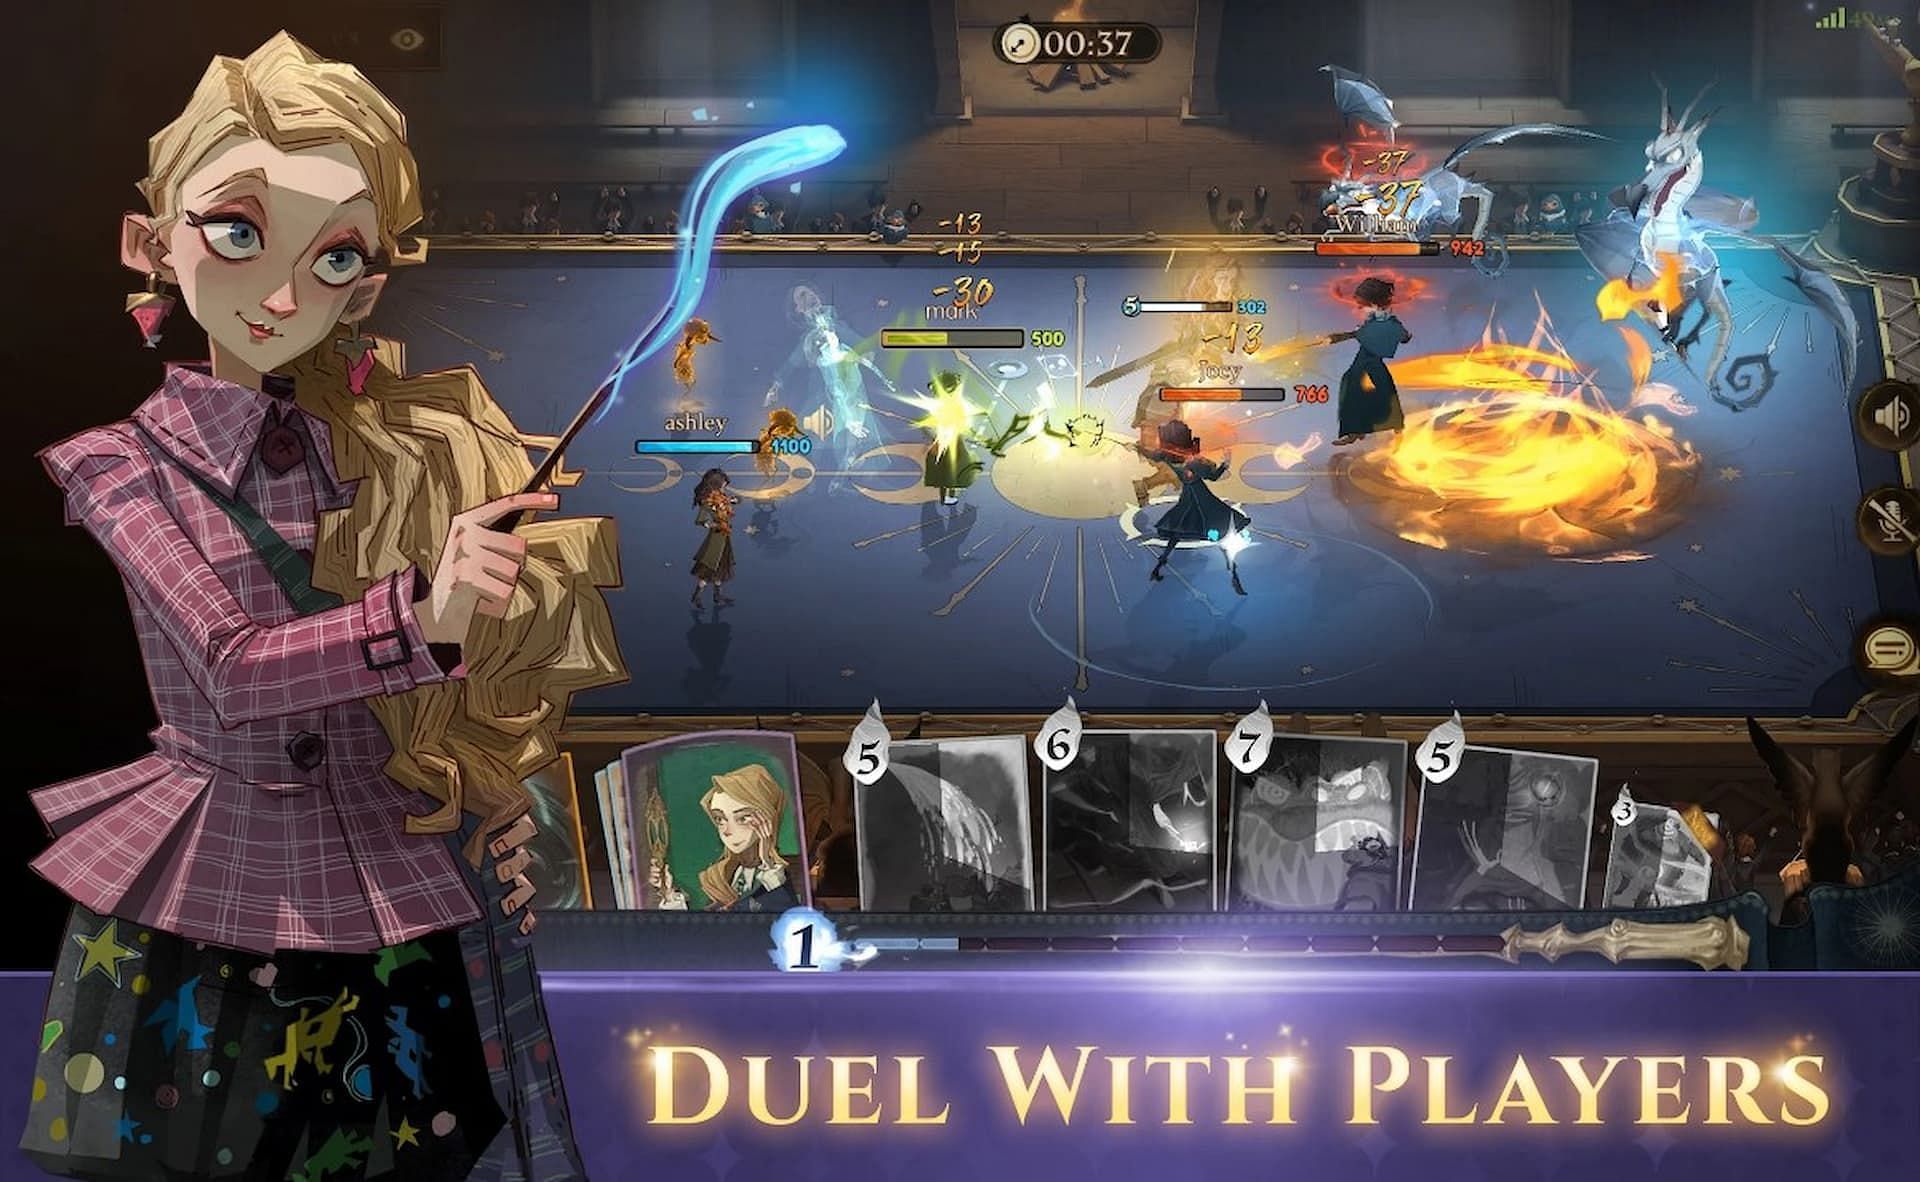 Decks are used for duels in Harry Potter Magic Awakened (Image via WB Games)